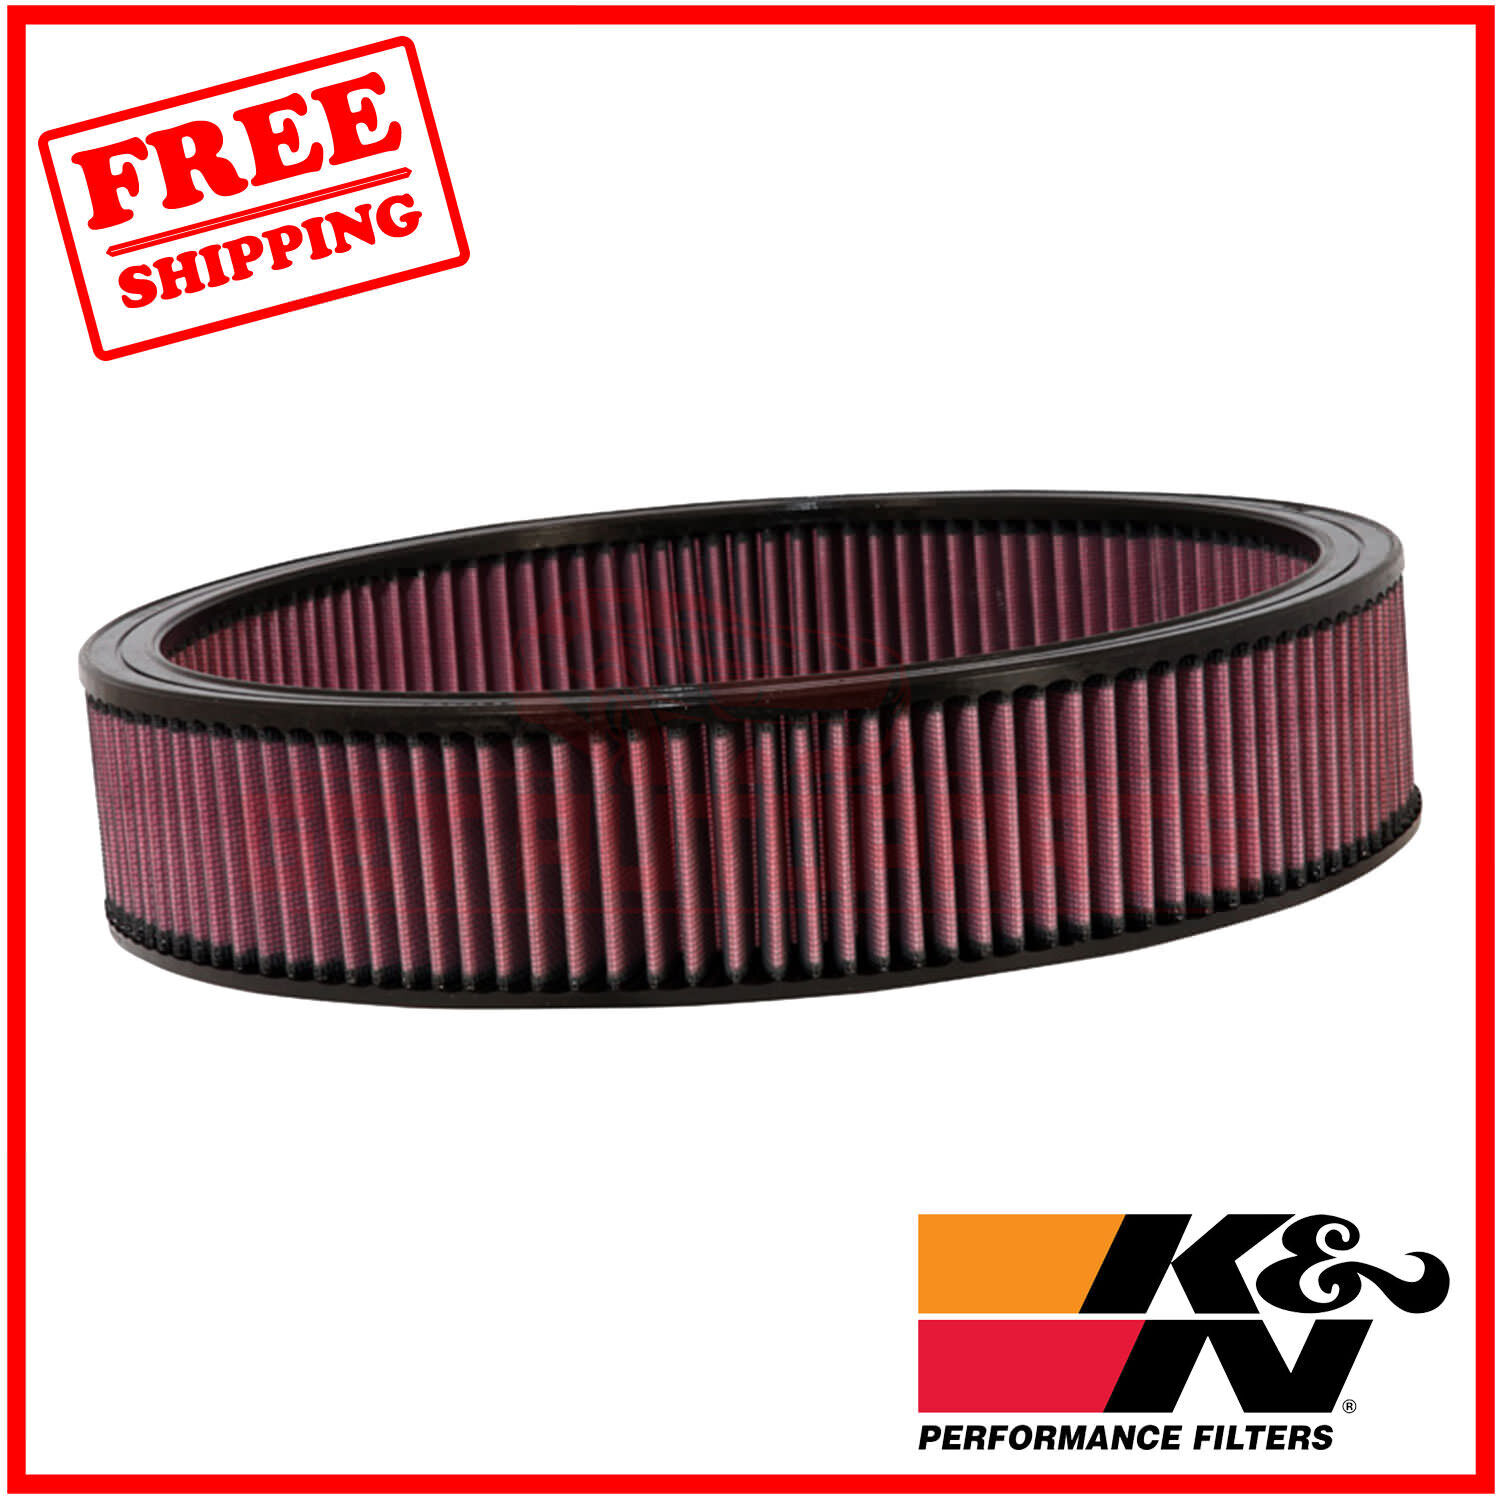 K&N Replacement Air Filter for Oldsmobile Cutlass Supreme 1975